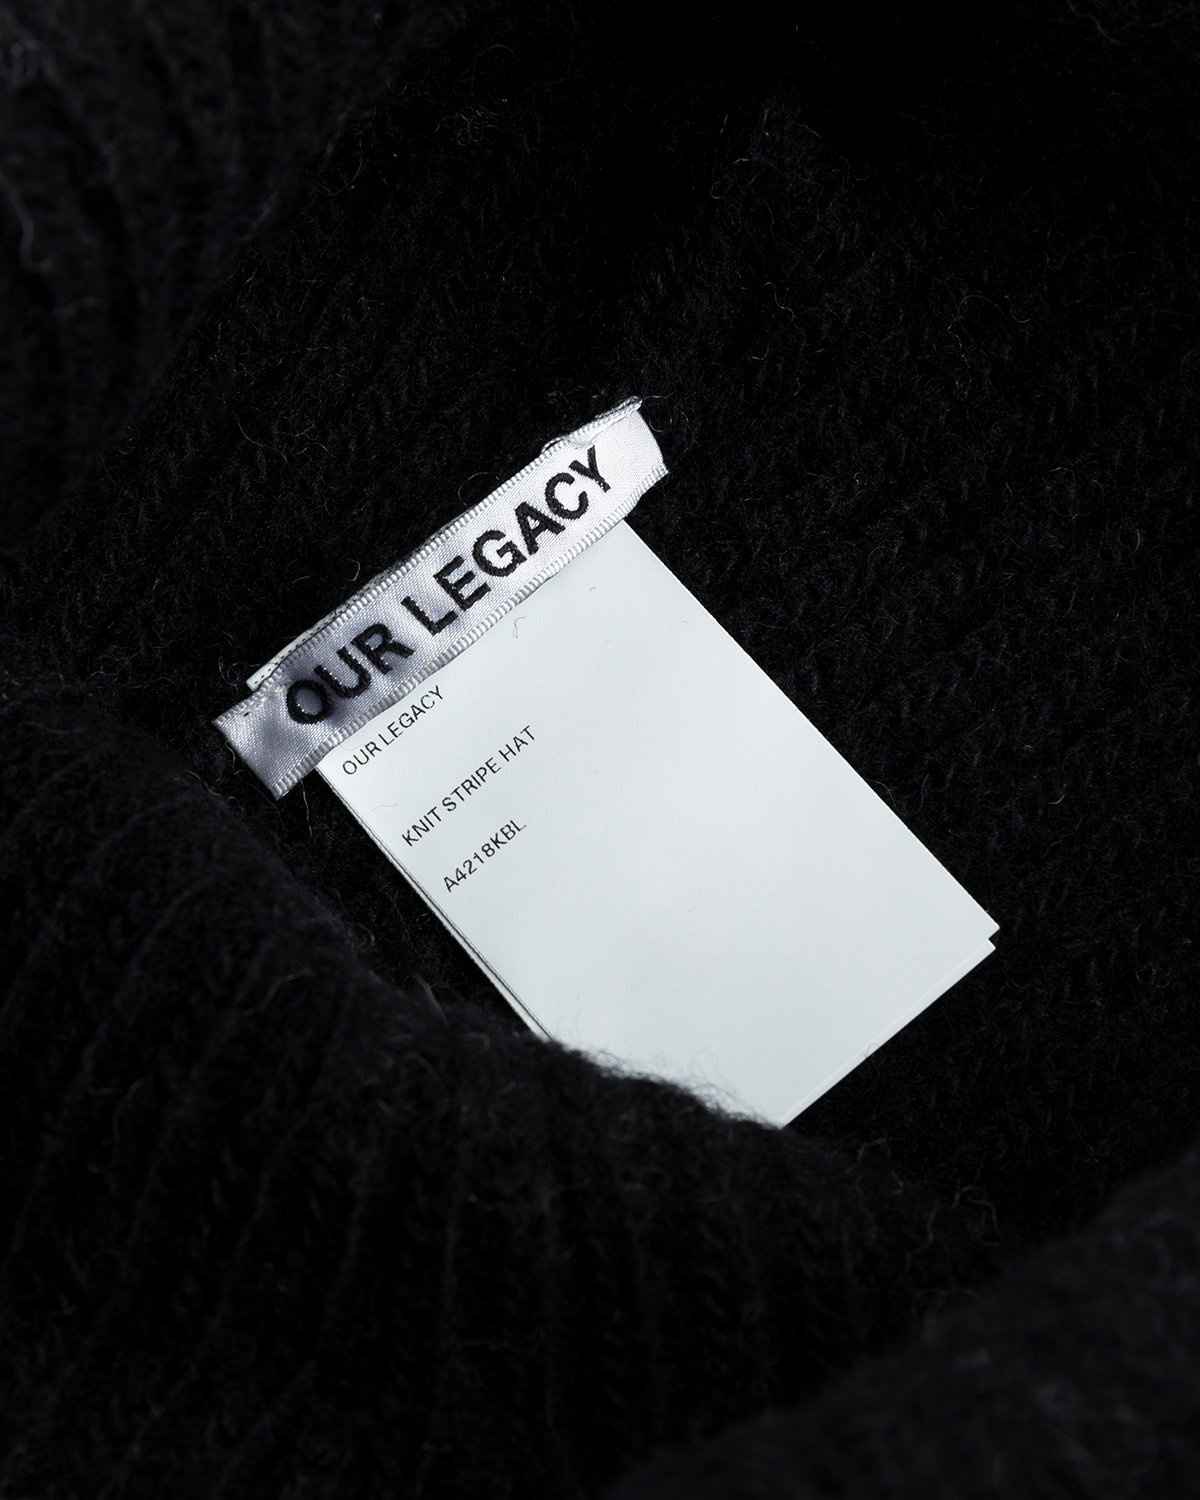 Our Legacy – Knitted Stripe Hat Black Ivory Wool - Beanies - Black - Image 3